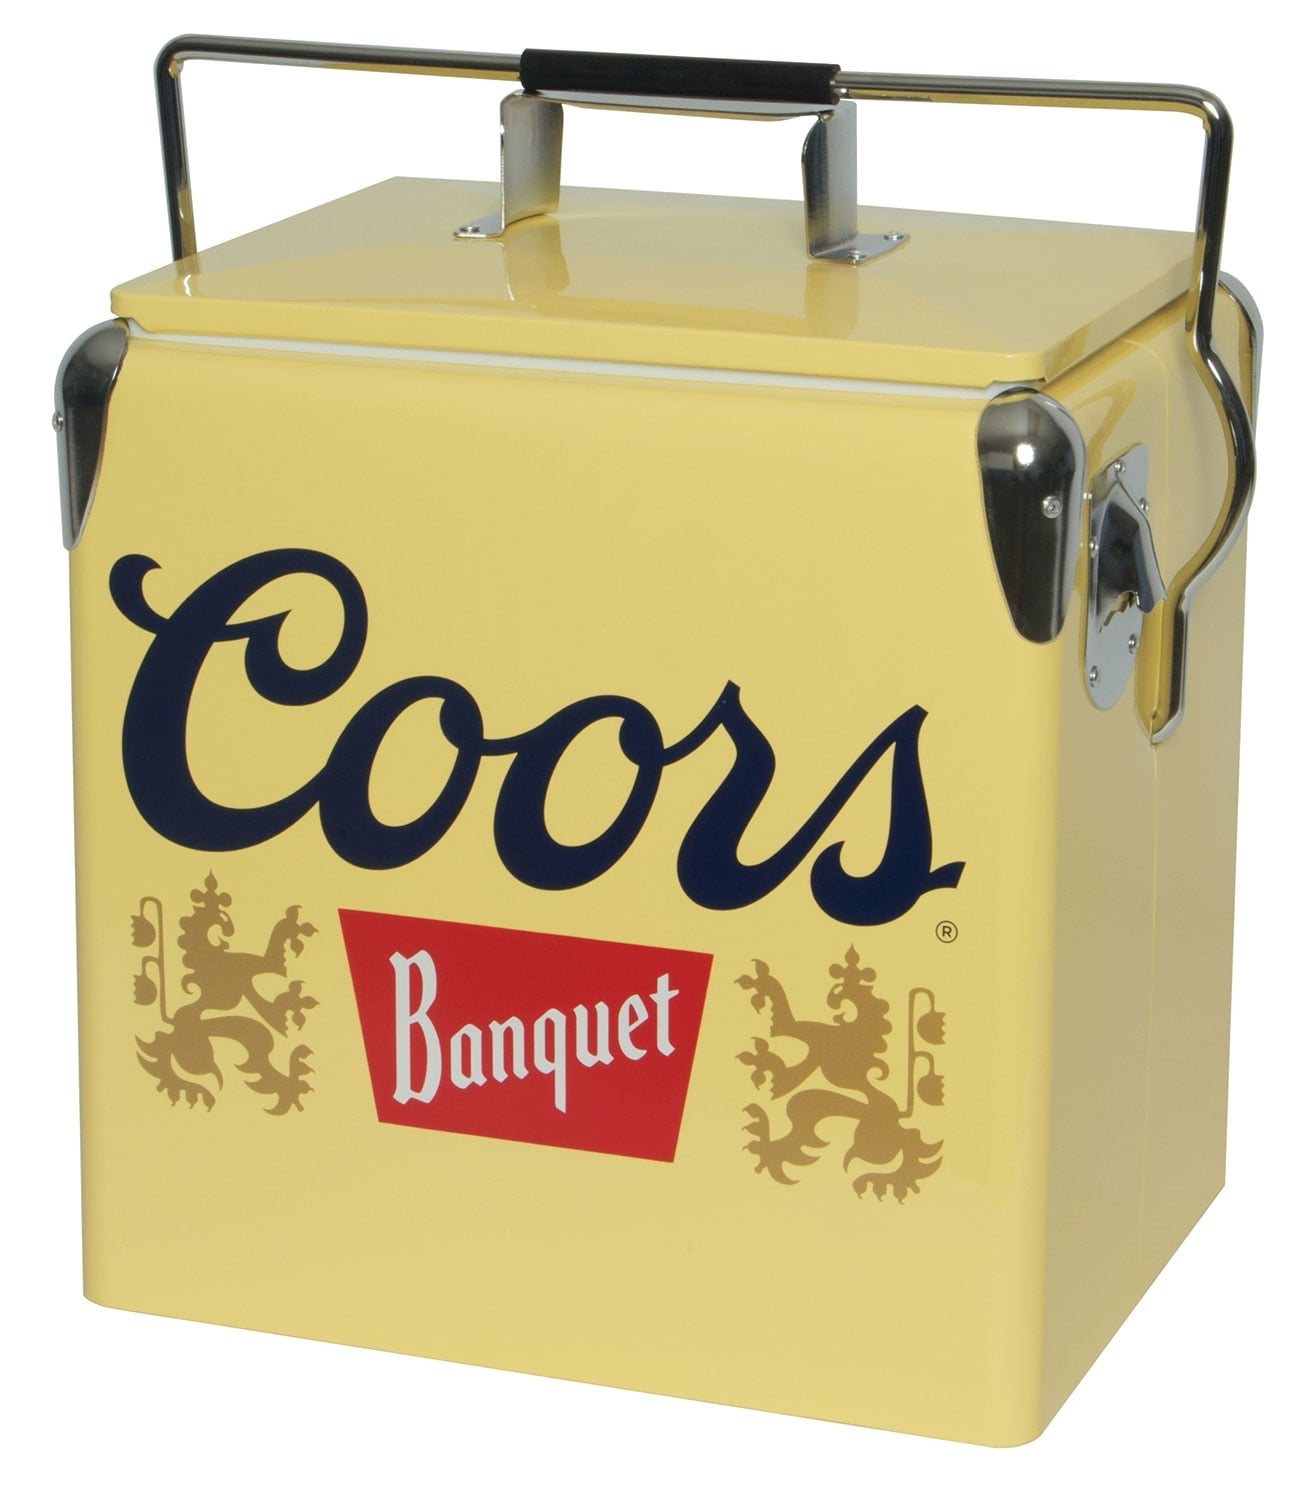 Coors Banquet 18 Can Ice Chest with 